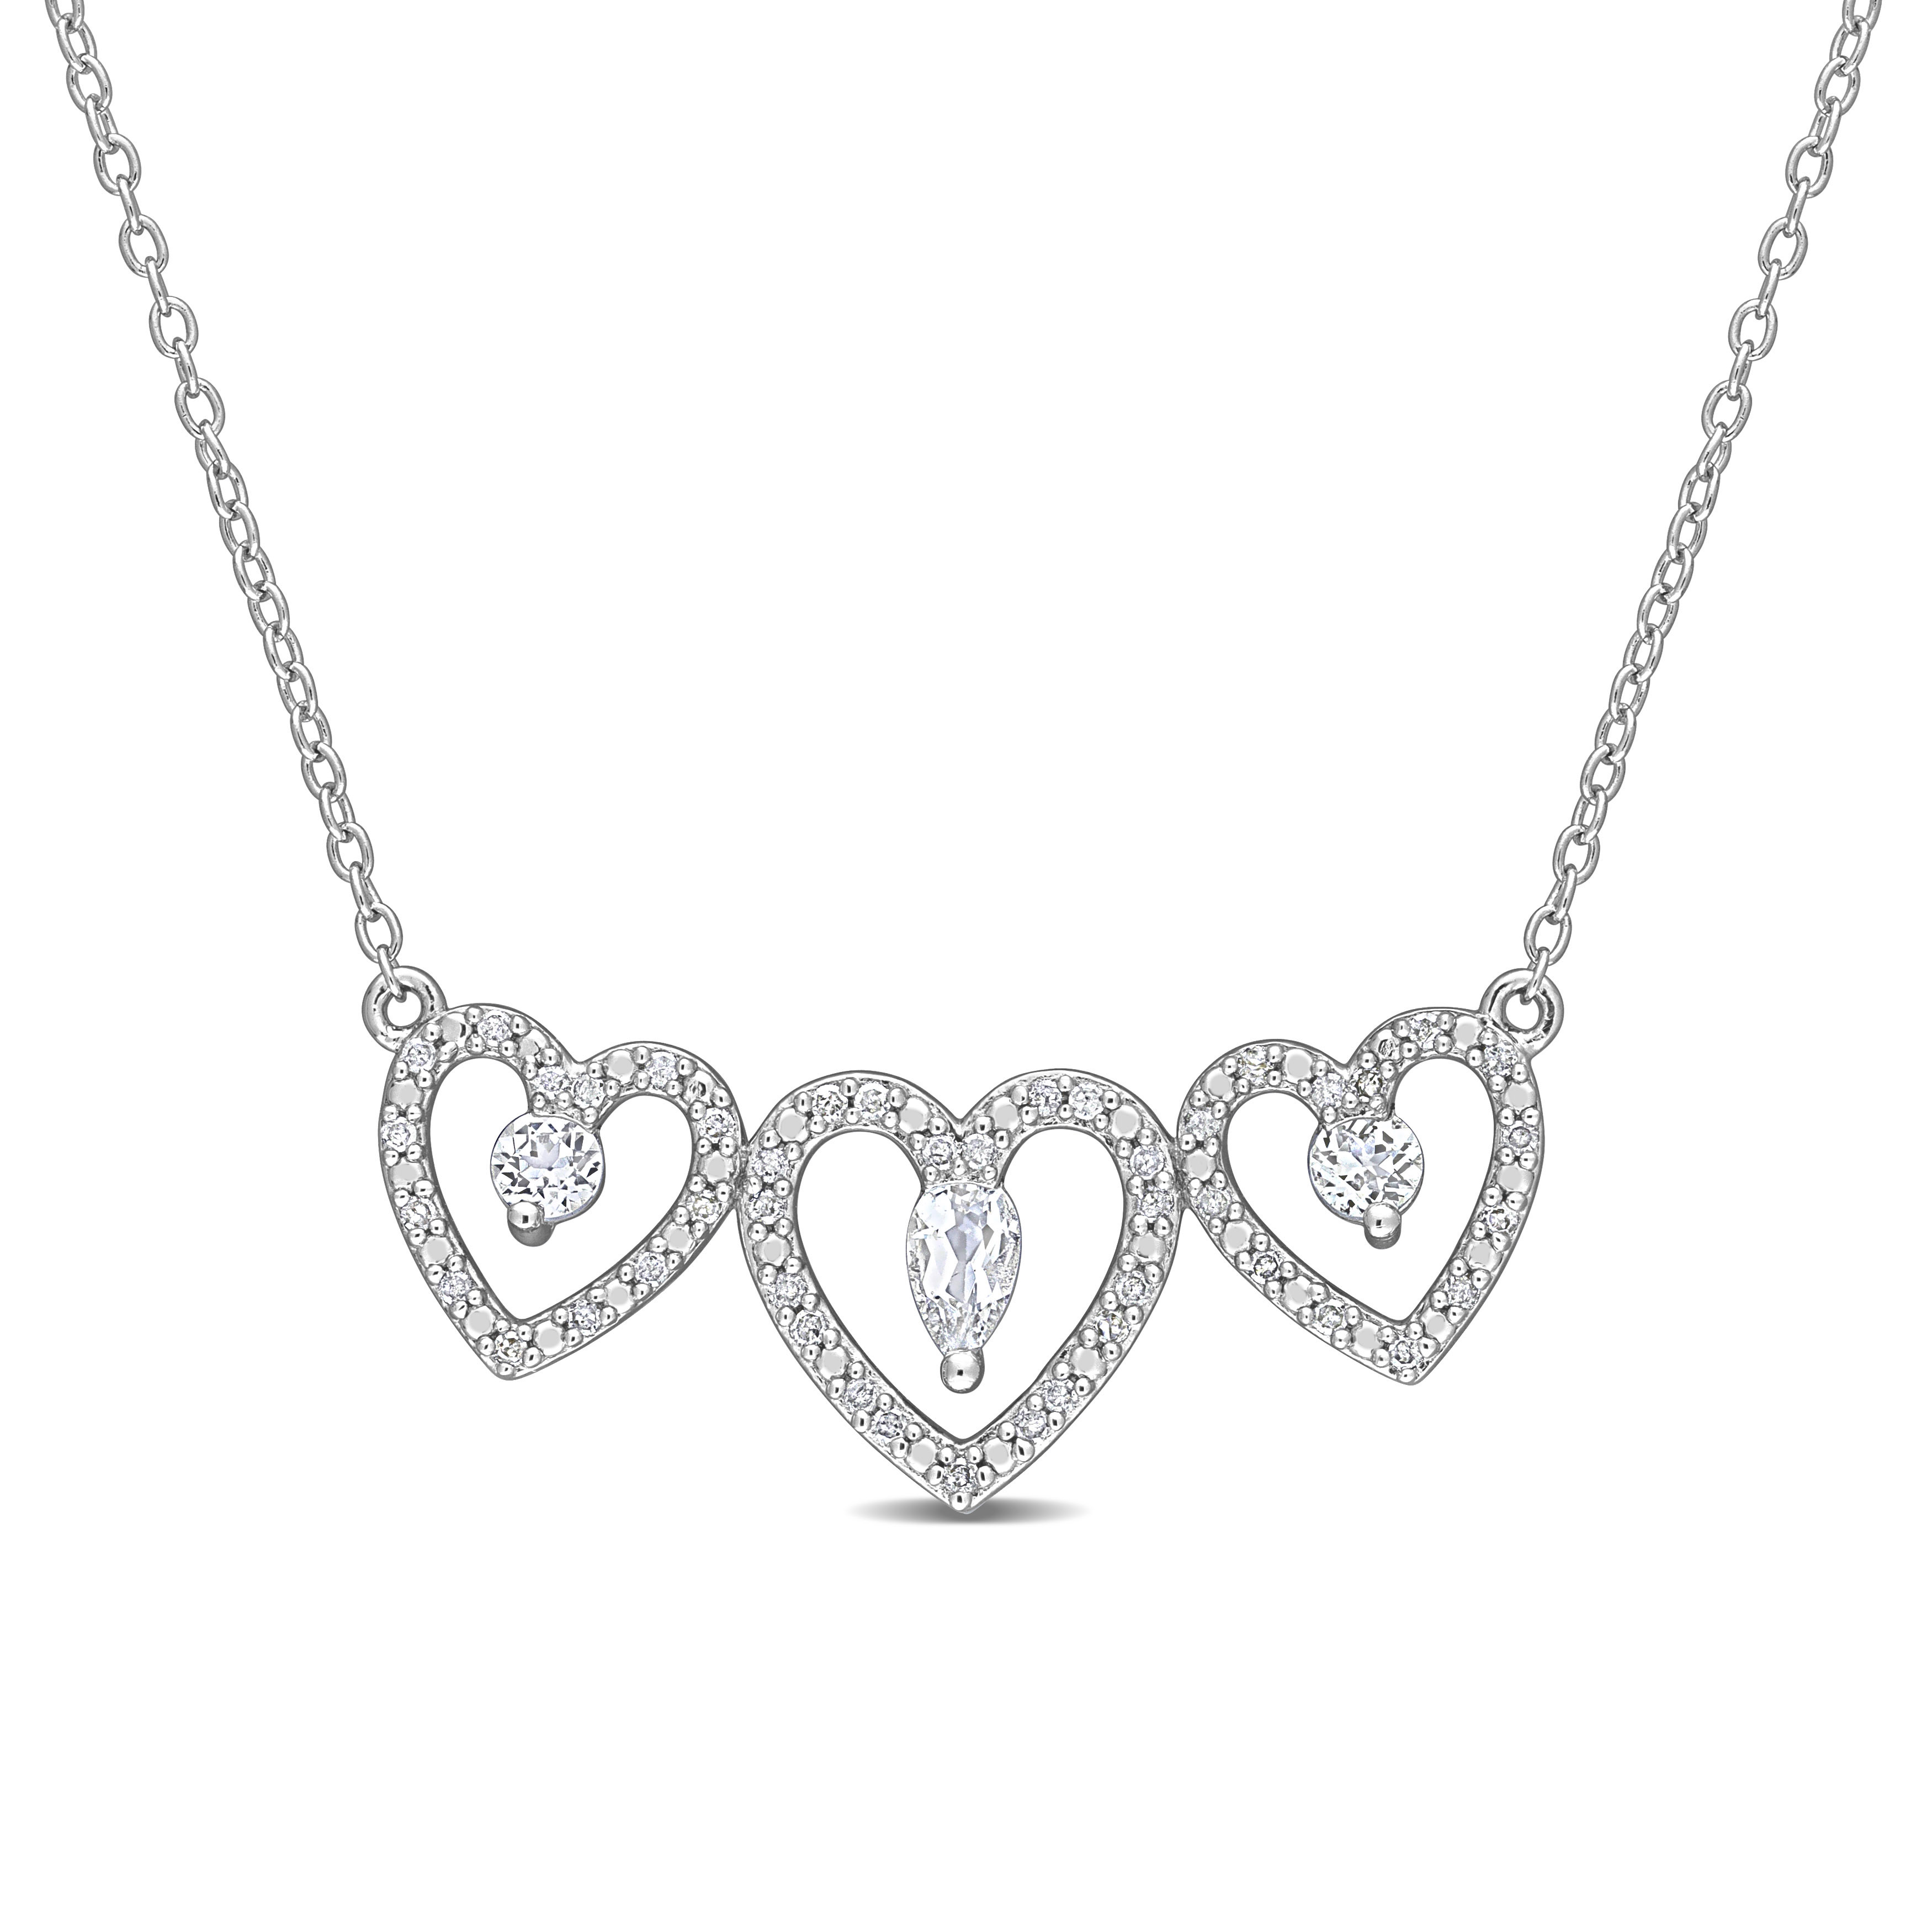 1/2 CT TGW White Topaz and 1/5 CT TDW Diamond Triple Heart Necklace in Sterling Silver - 16 in.